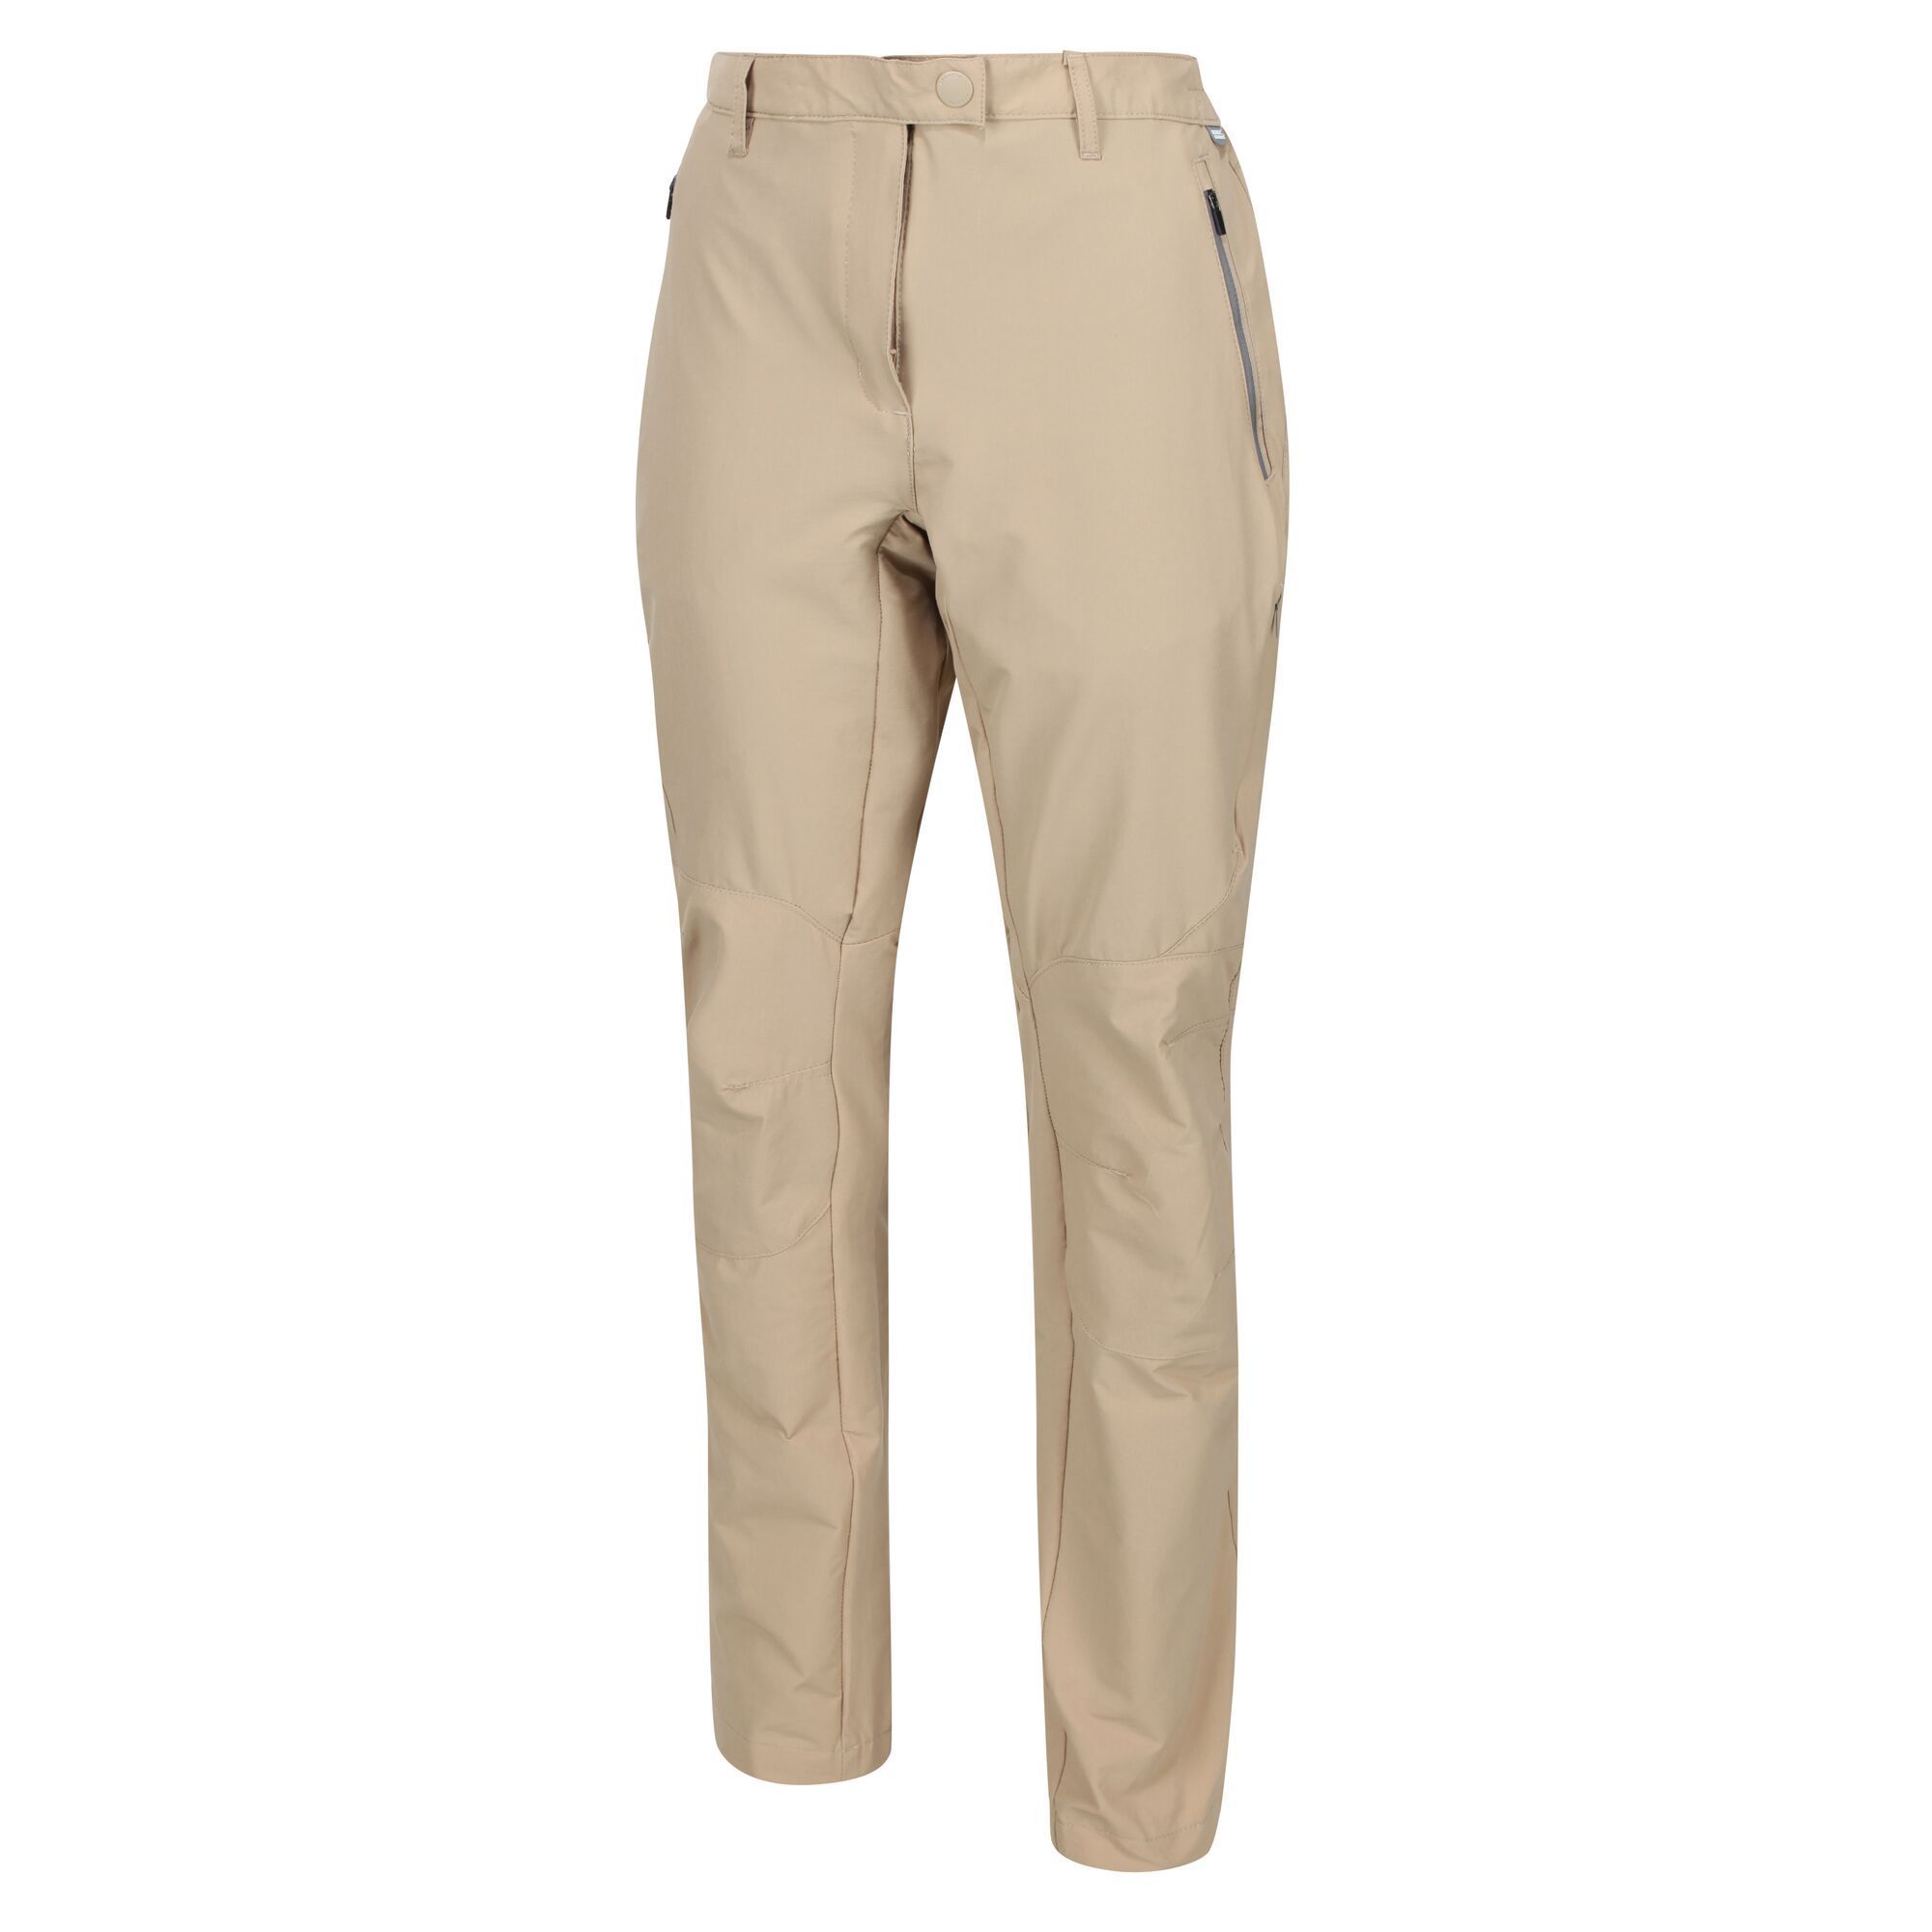 Material: 94% polyamide, 6% elastane. High-stretch, weather-resistant, Isoflex trousers. The lightweight, cool-wearing polyamide stretch fabric has a DWR (durable water repellent) finish. With UPF 40+ sun protection built-in. Features a part elasticated waist. The front and back pockets feature zip fastenings with easy-grab pullers for access on-the-go. With a small Regatta tab. Size (waist/hip): (6 UK) 23in/33in, (8 UK) 25in/35in, (10 UK) 27in/37in, (12 UK) 29in/39in, (14 UK) 31in/41in, (16 UK) 33in/43in, (18 UK) 36in/45in, (20 UK) 38in/47in, (22 UK) 41in/50in, (24 UK) 43/52in, (26 UK) 45/54in, (28 UK) 47in/57in, (30 UK) 49in/59in, (32 UK) 51in/61in, (34 UK) 53in/63in, (36 UK) 55in/65in. Size (leg length): (S) 29in, (R) 31in, (L) 33in.